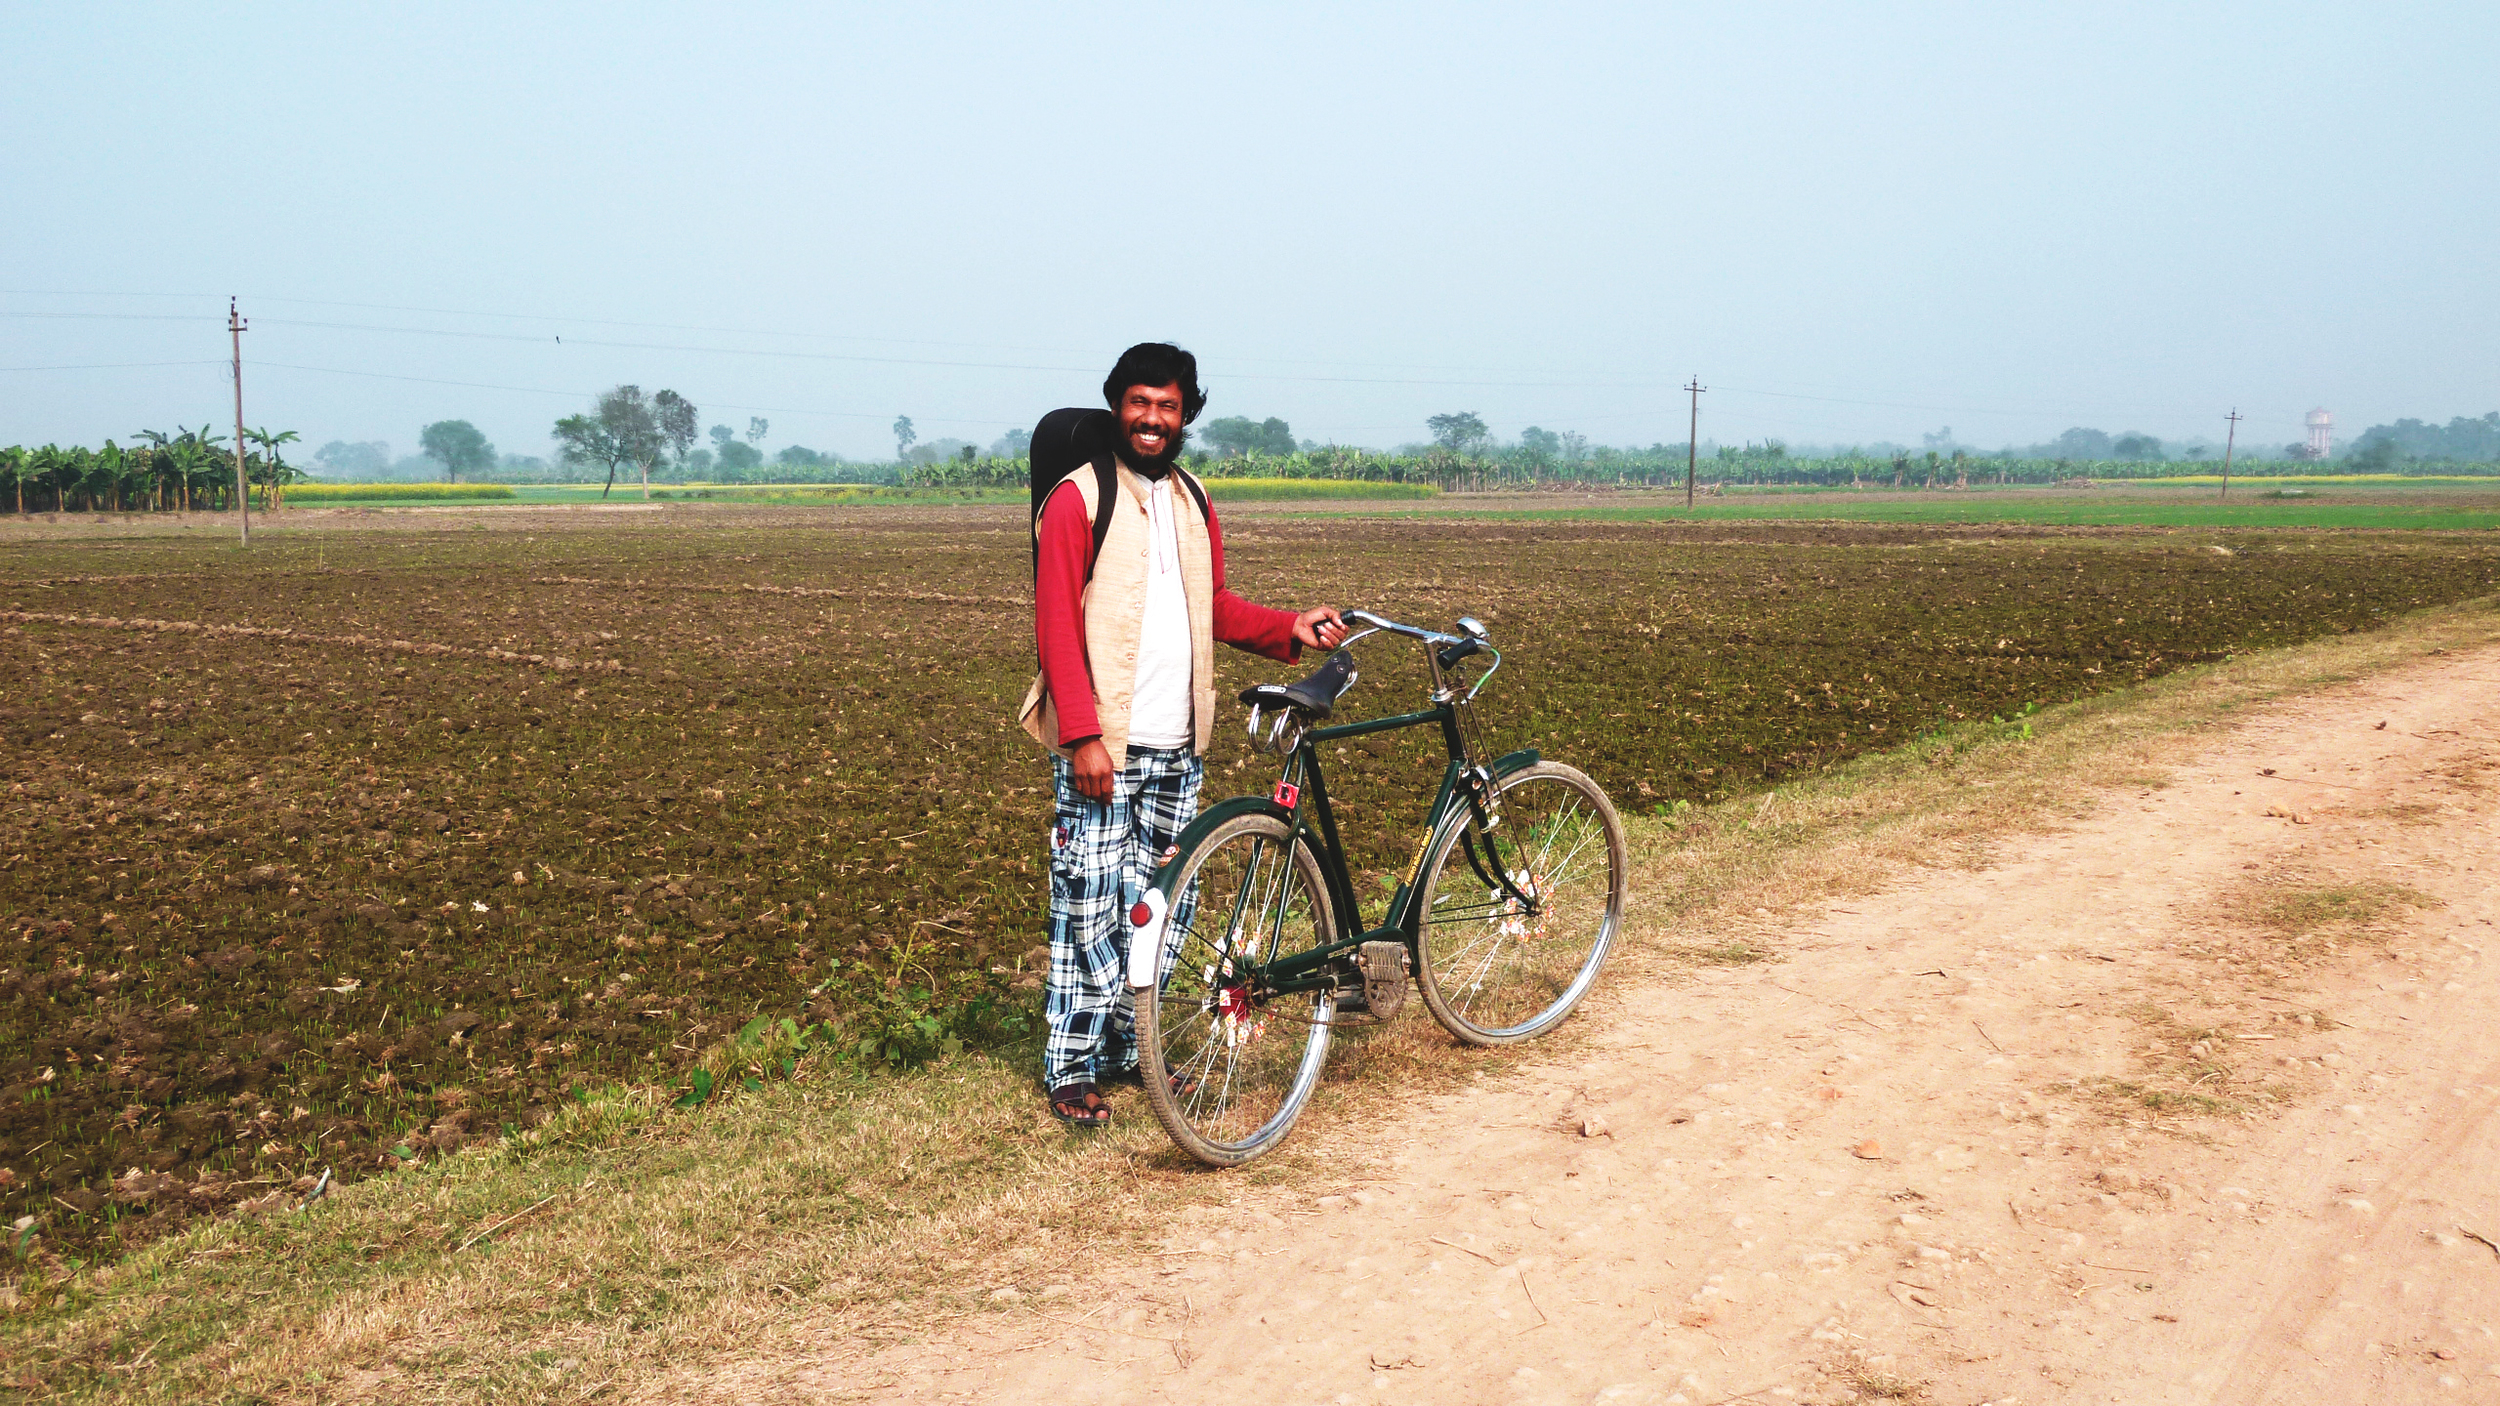  Noor Alam and his bike, a visit to a friend, December 2011&nbsp;© Edith 